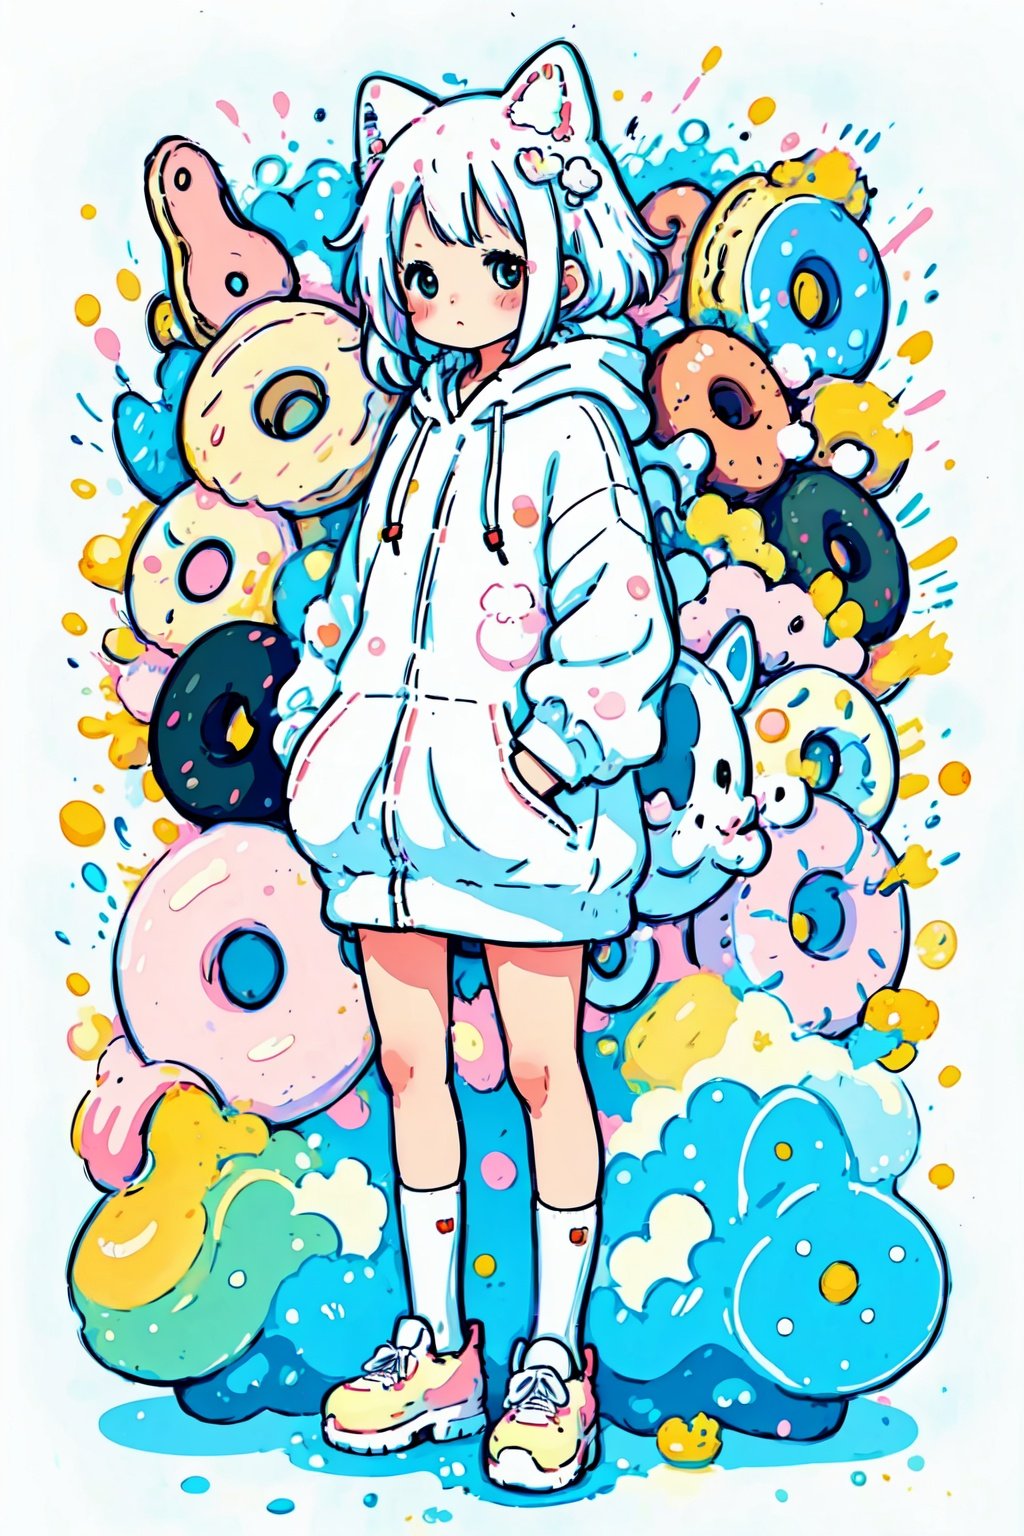 style of Chiho Aoshima, adorable, cute, a girl, white hair, puffy hoody, donuts, many cats, full body, pastel colors, simple white background, in donuts, Illustration, cover art, japan, blur, shiny,minimalistic,simplecats